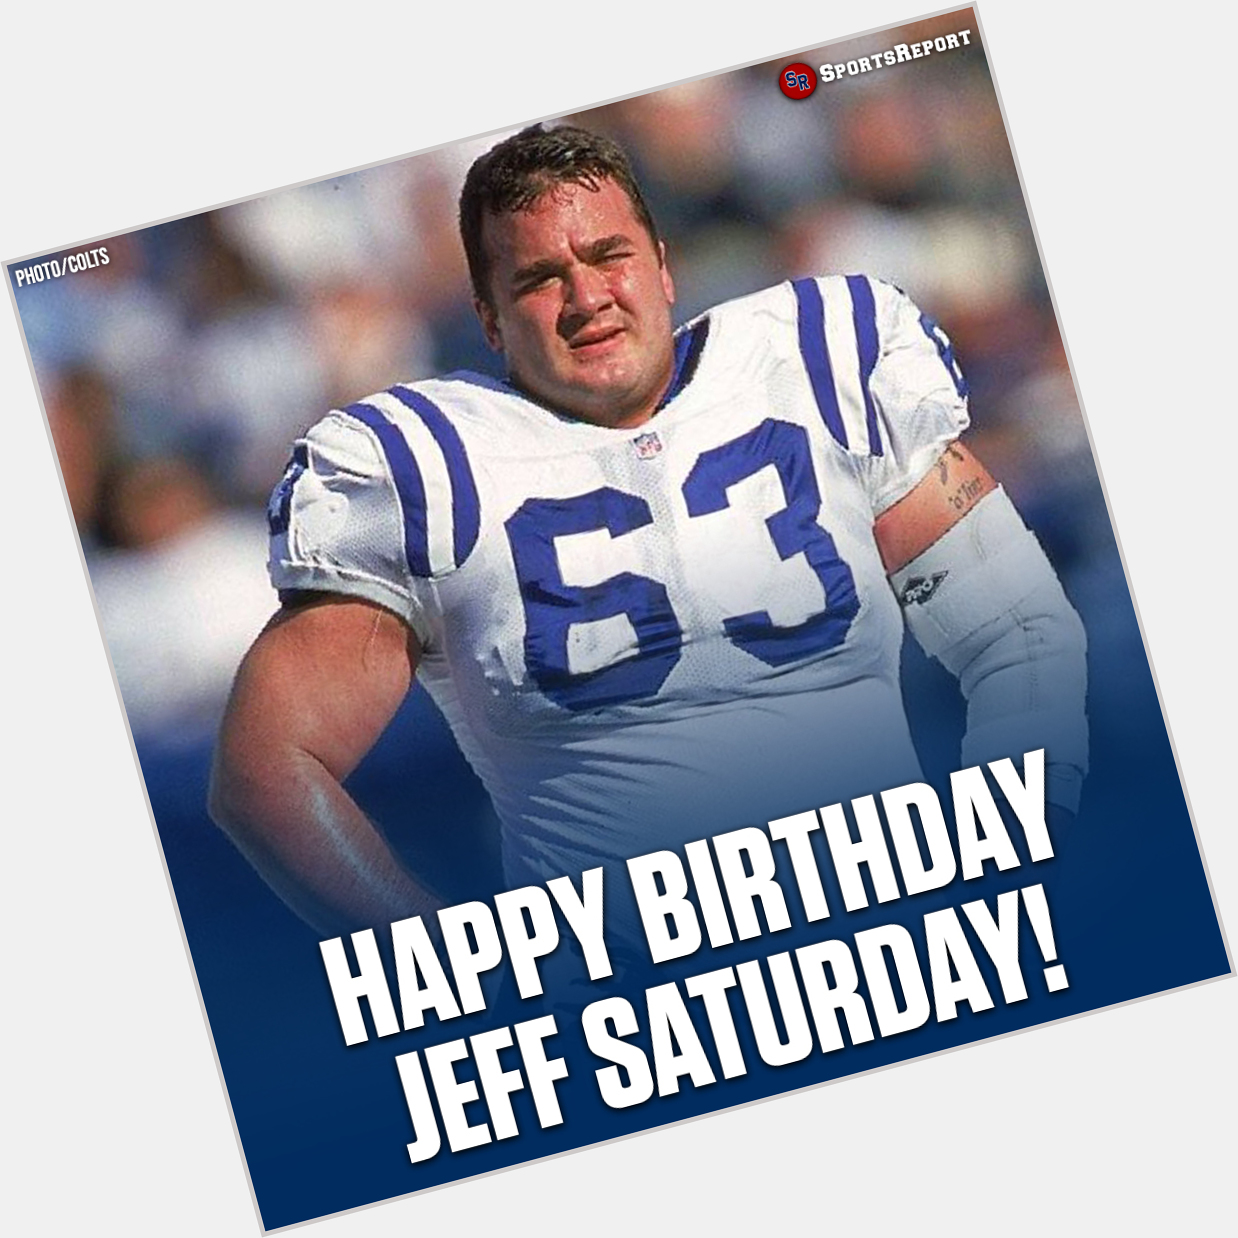 Colts Fans, let\s wish Legend Jeff Saturday a Happy Birthday! 